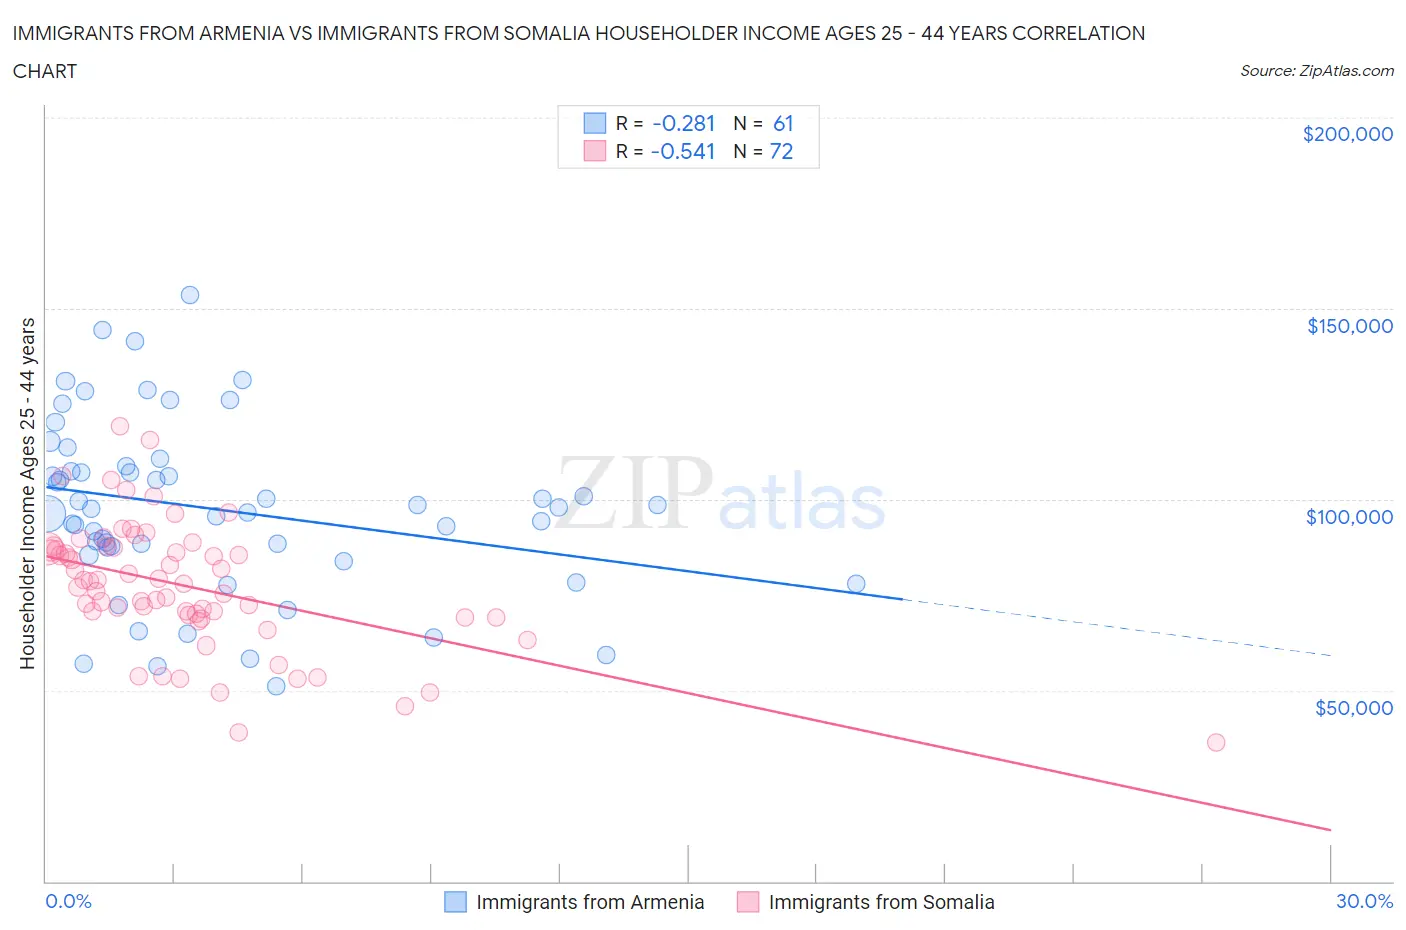 Immigrants from Armenia vs Immigrants from Somalia Householder Income Ages 25 - 44 years